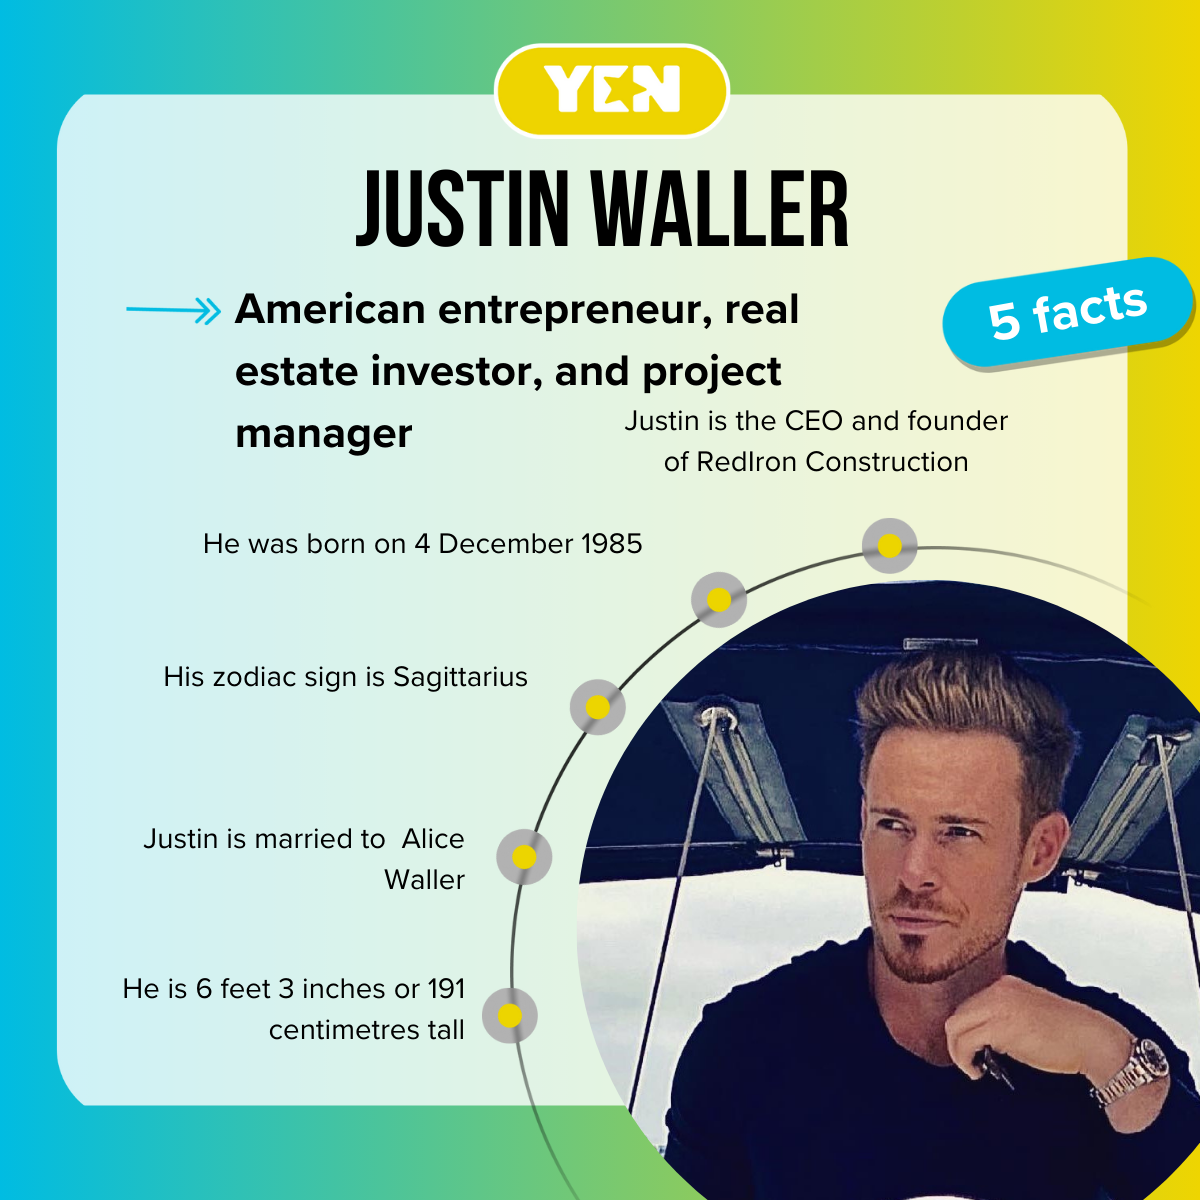 Facts about Justin Waller